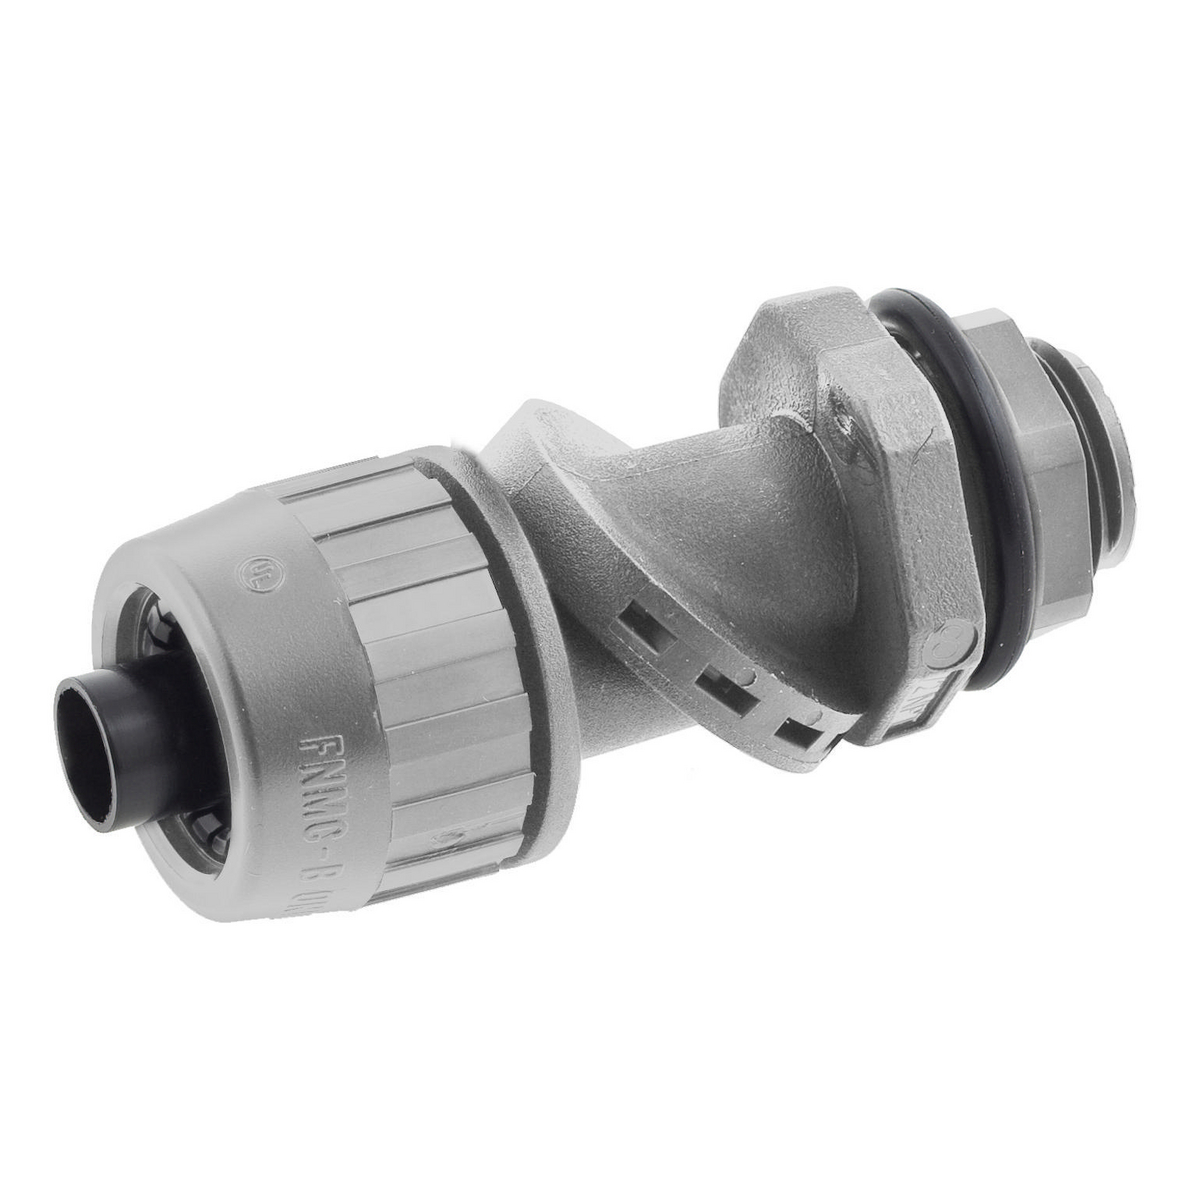 PS0509NGY Hubbell Liquid Tight SwivlLok Fitting, 1/2' Conduit Fitting 2